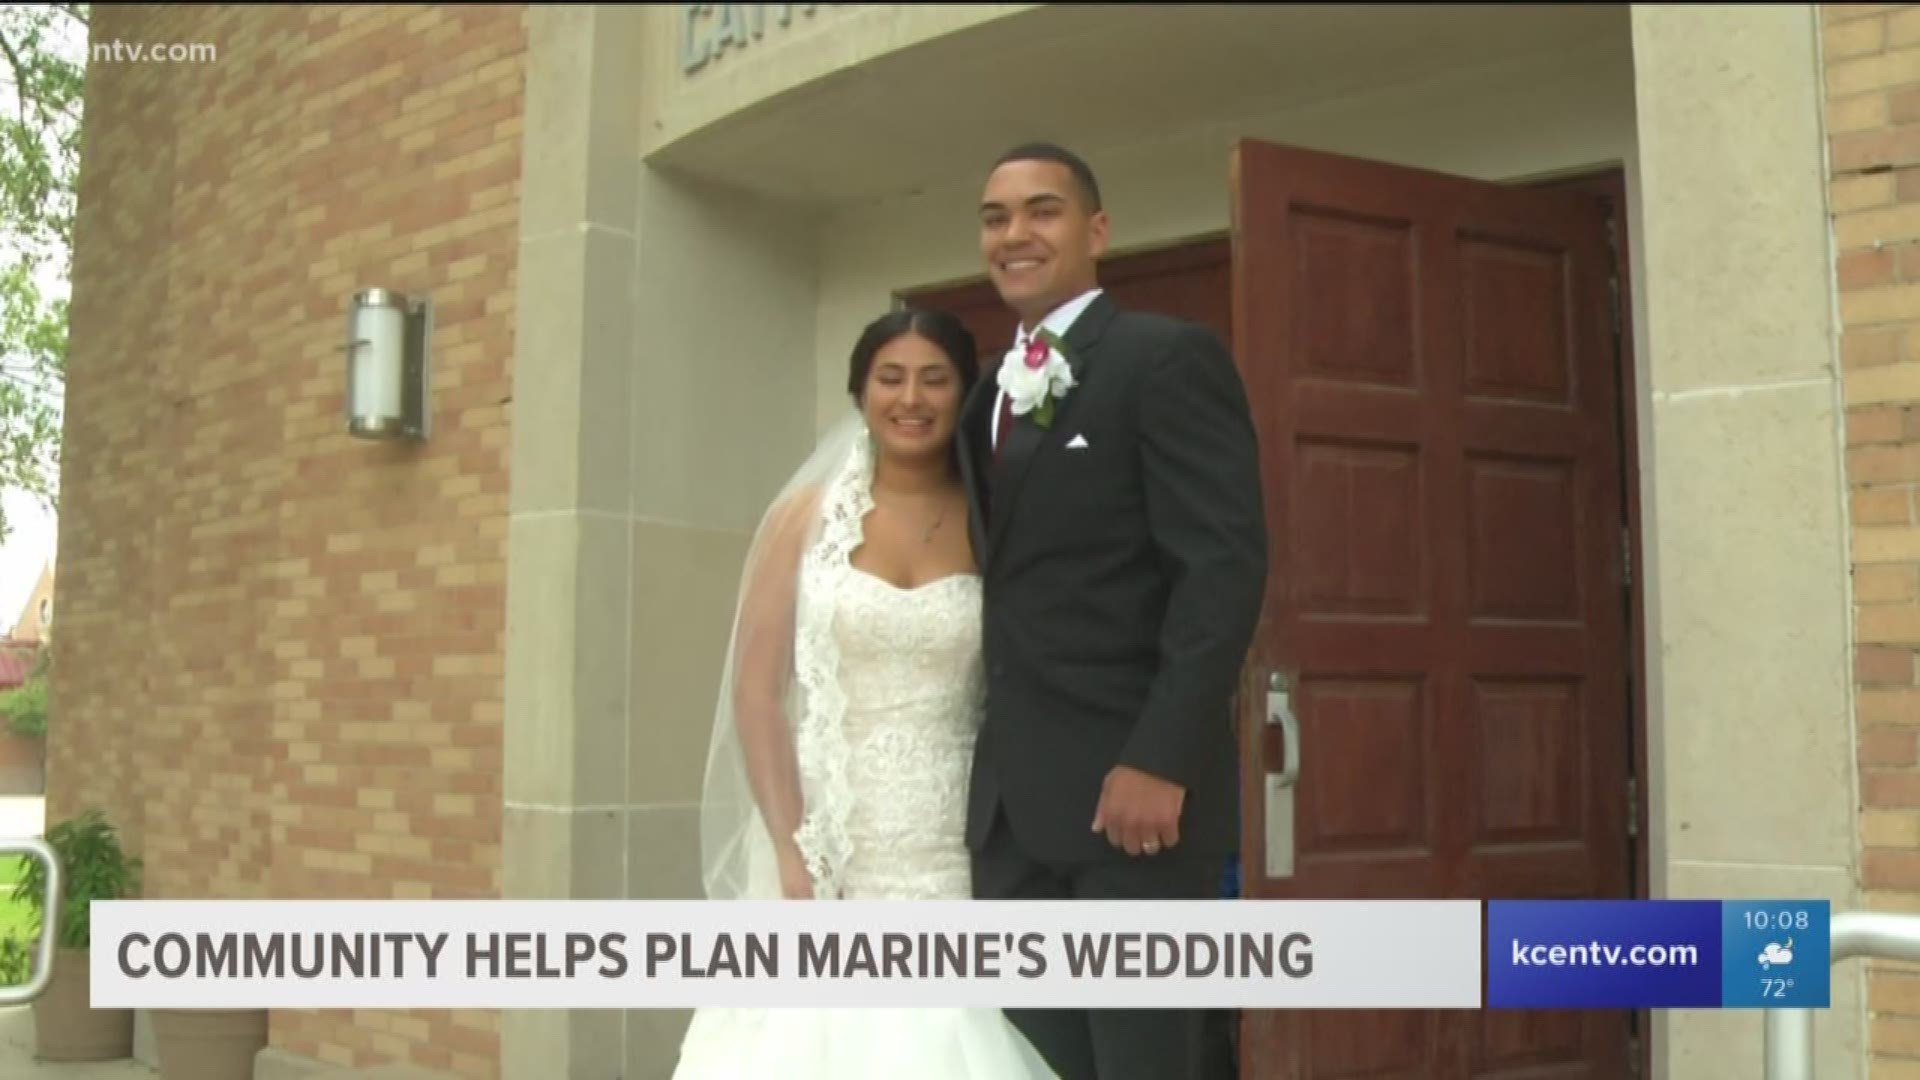 The military community came together to put together a wedding for a displaced Marine and his now-wife-- in just two days.